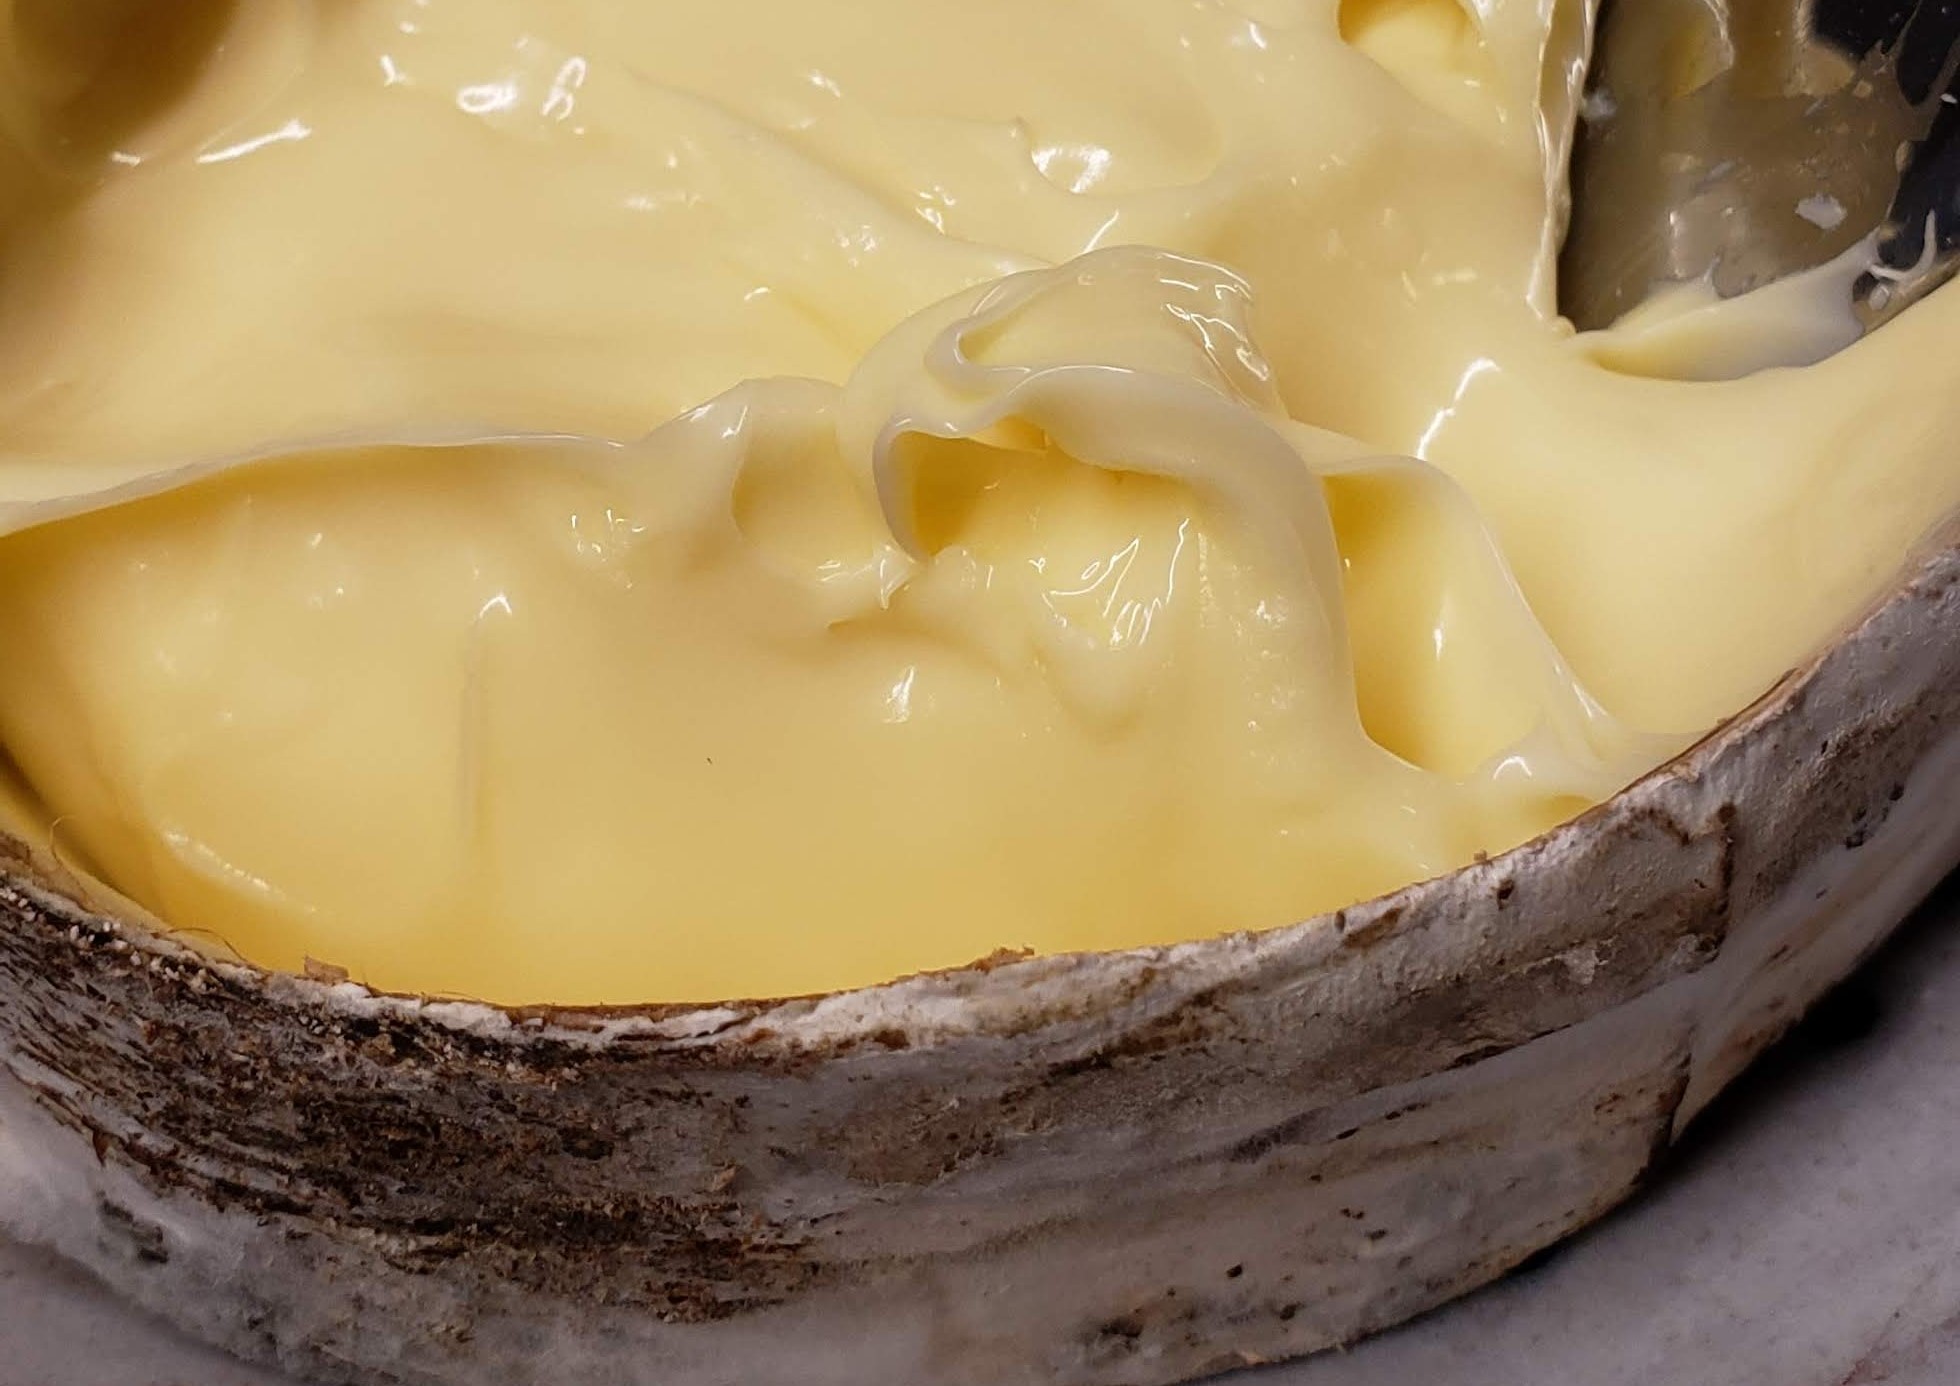 A close-up of the Rush Creek cheese with a custardy texture and light-yellow color.